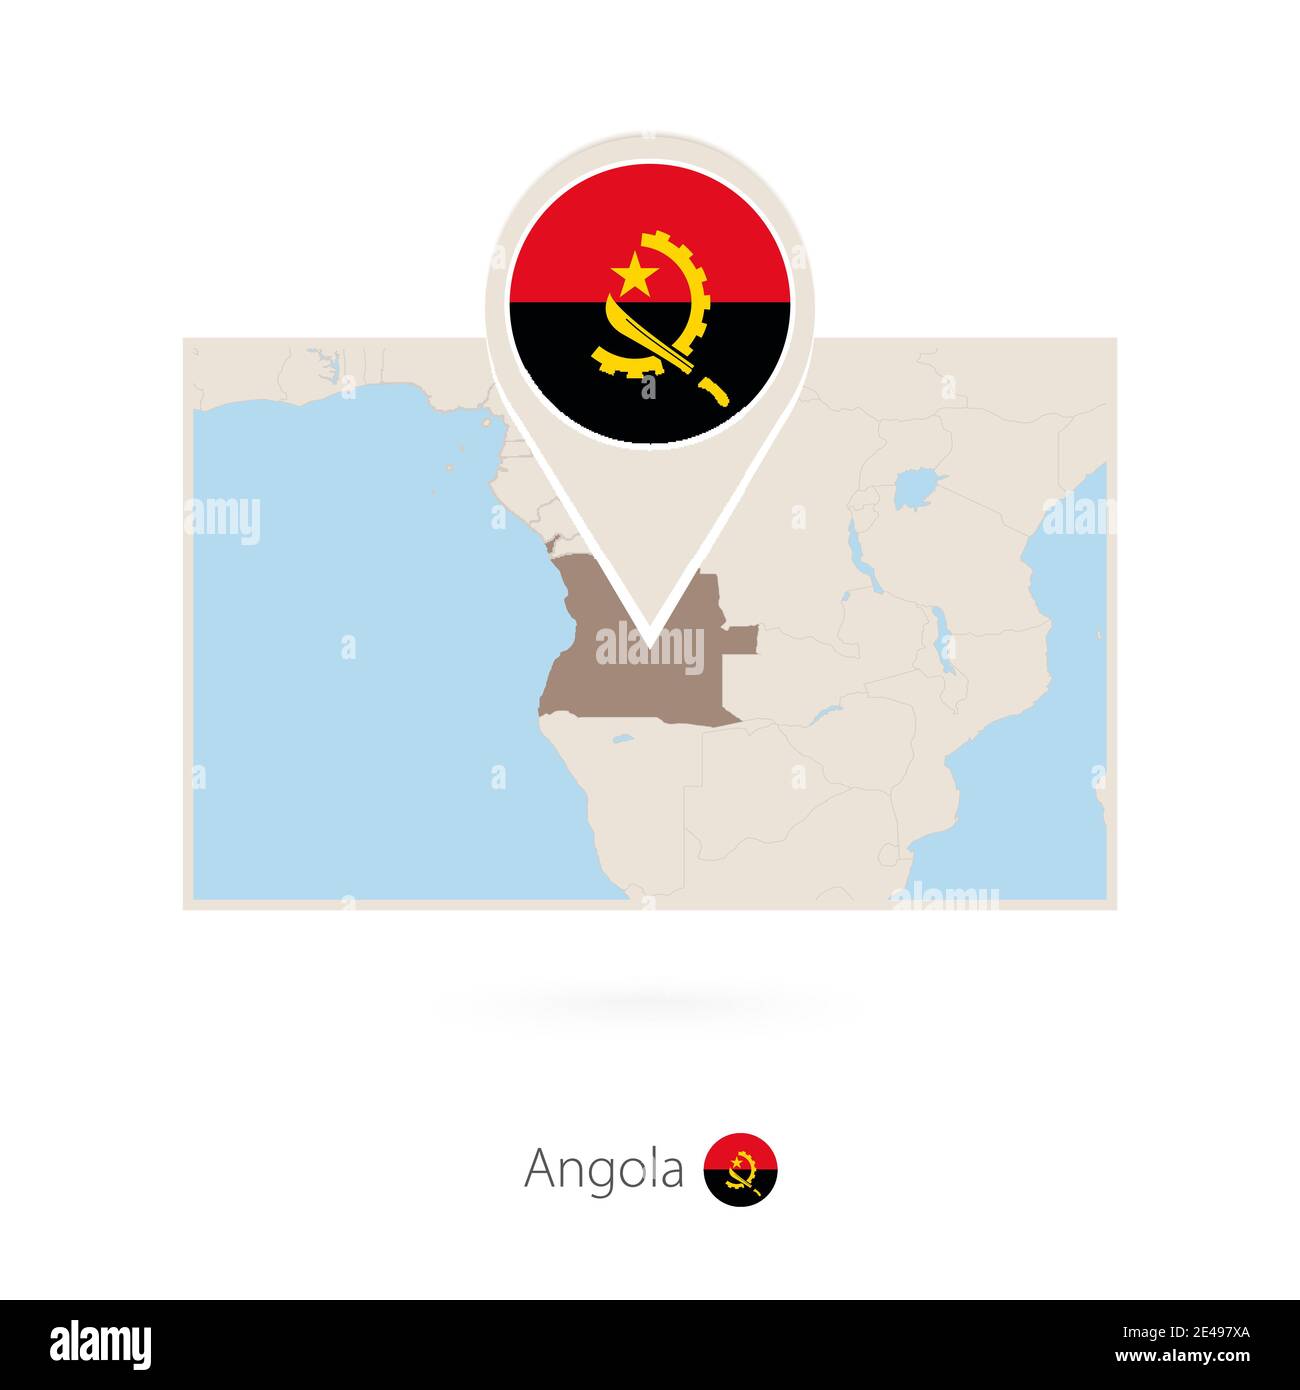 Rectangular map of Angola with pin icon of Angola Stock Vector